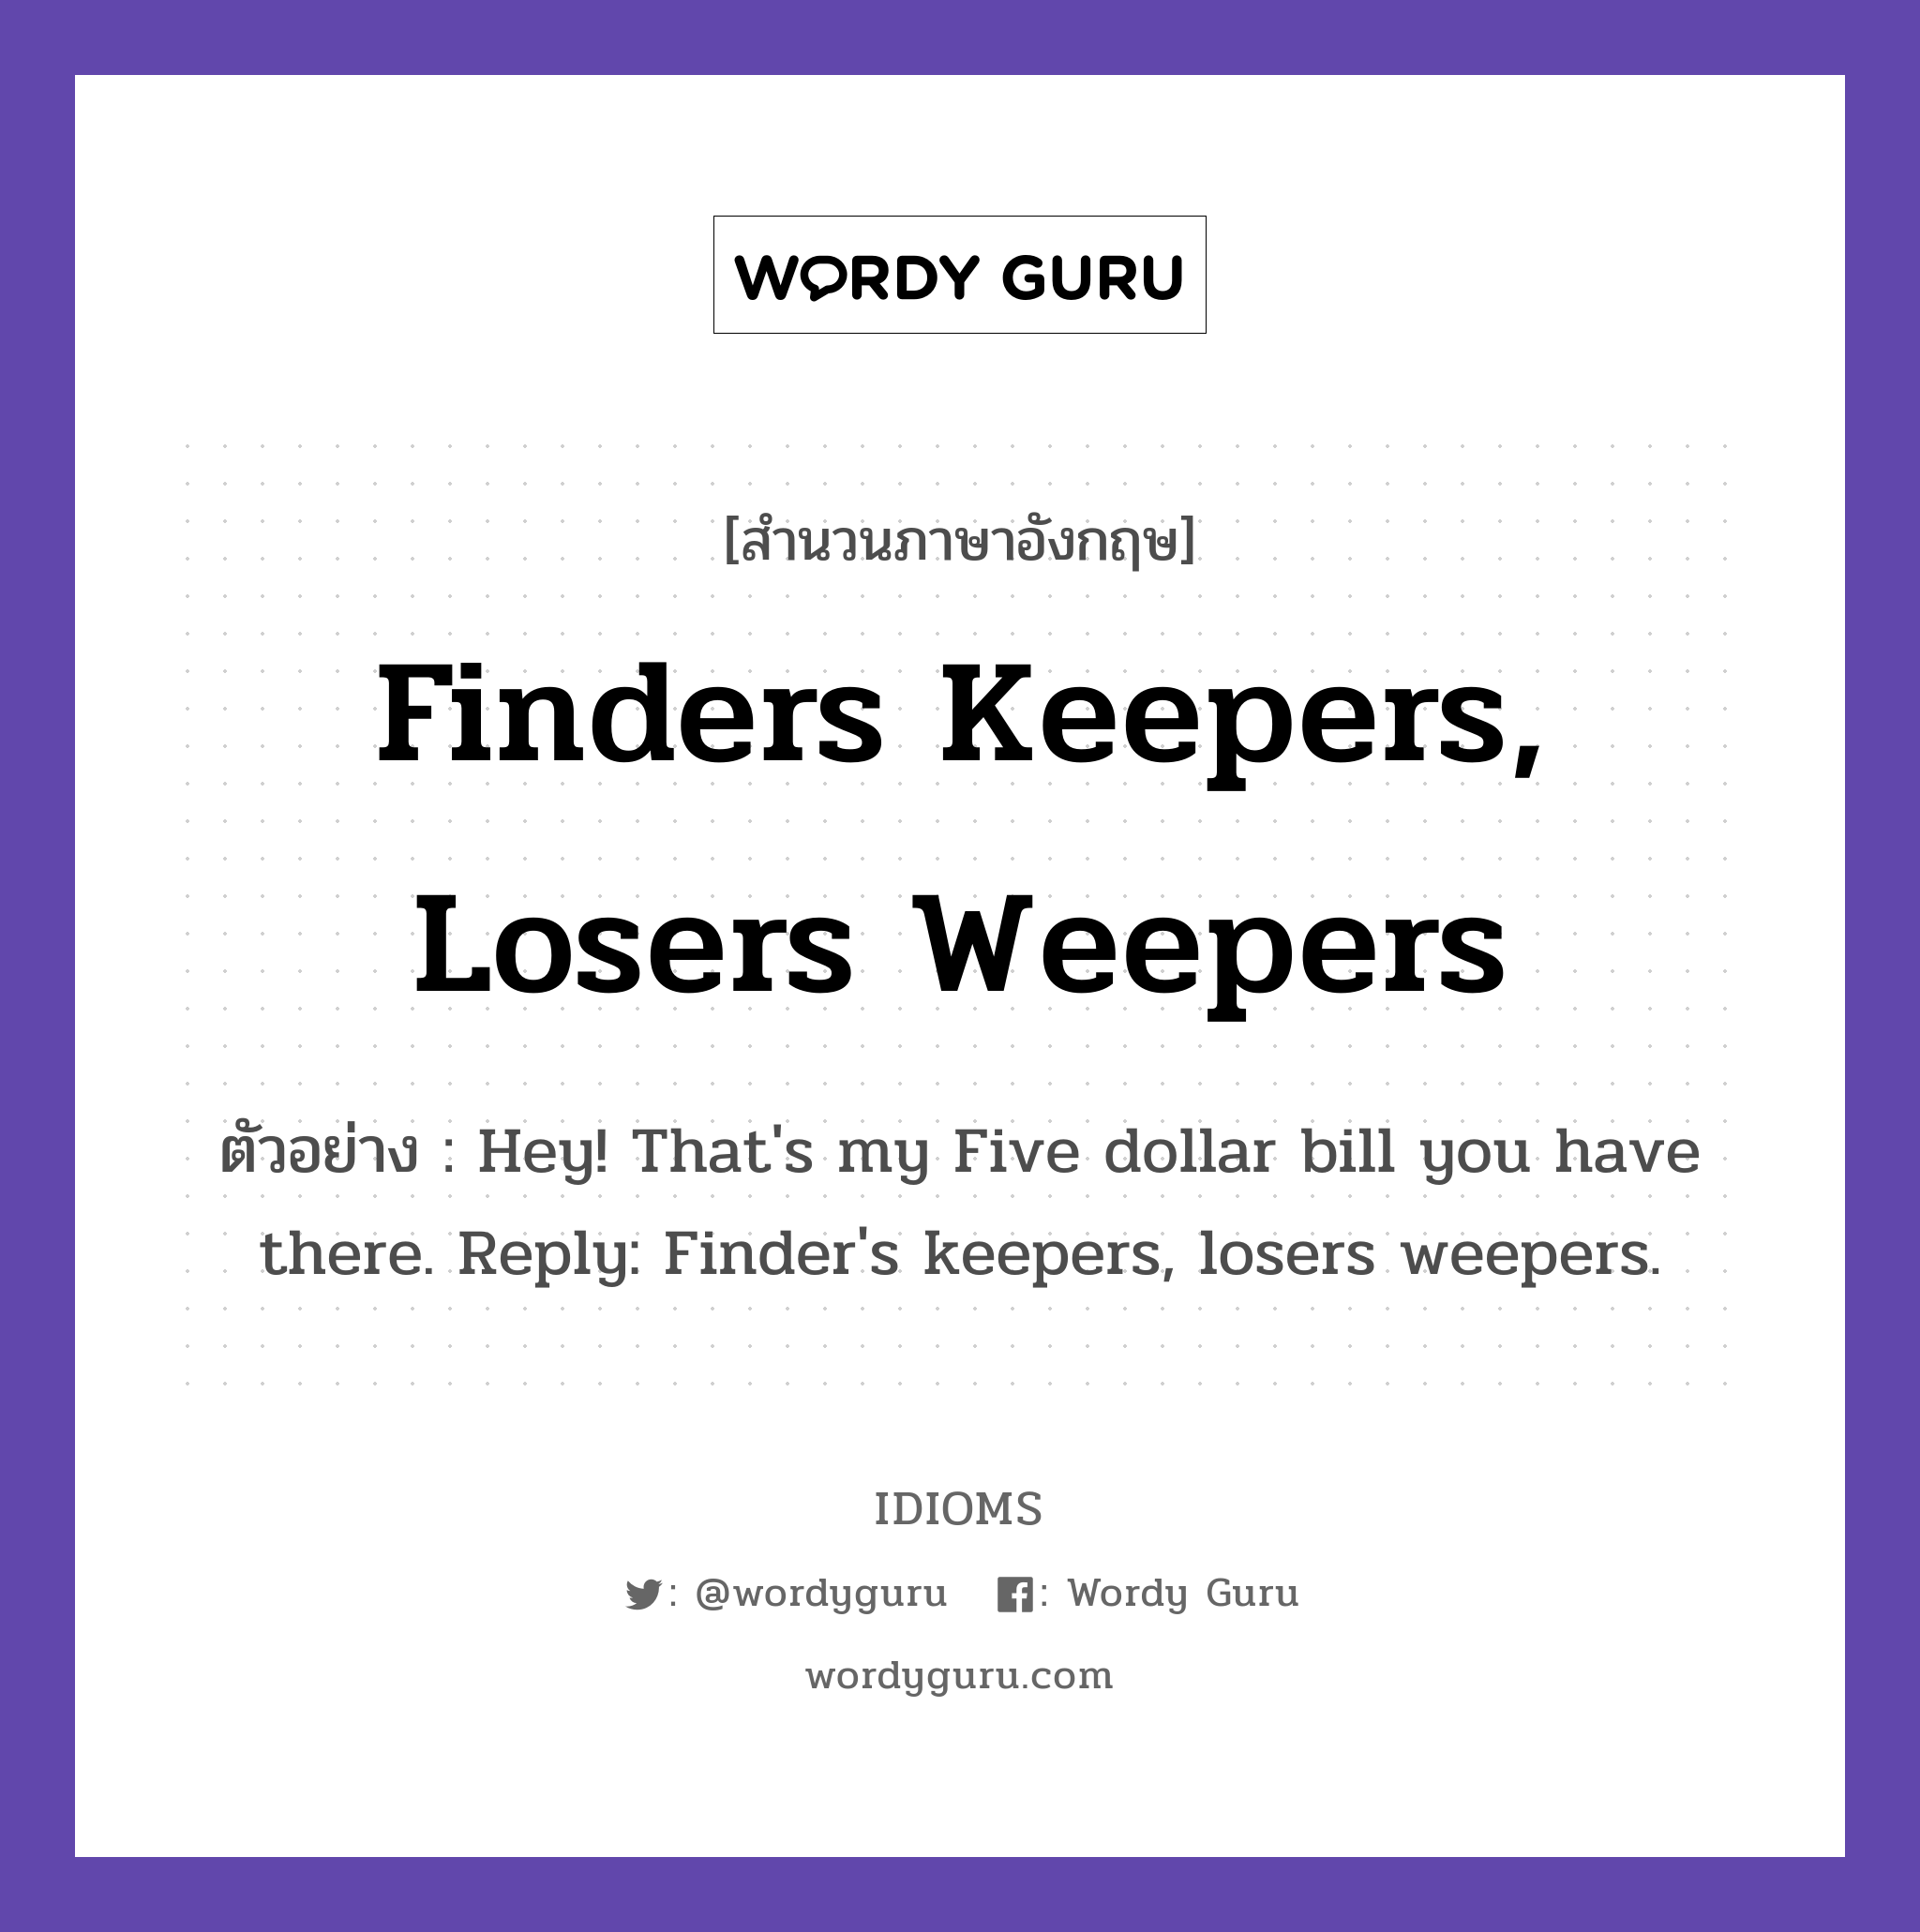 Finders Keepers, Losers Weepers แปลว่า?, สำนวนภาษาอังกฤษ Finders Keepers, Losers Weepers ตัวอย่าง Hey! That's my Five dollar bill you have there. Reply: Finder's keepers, losers weepers.